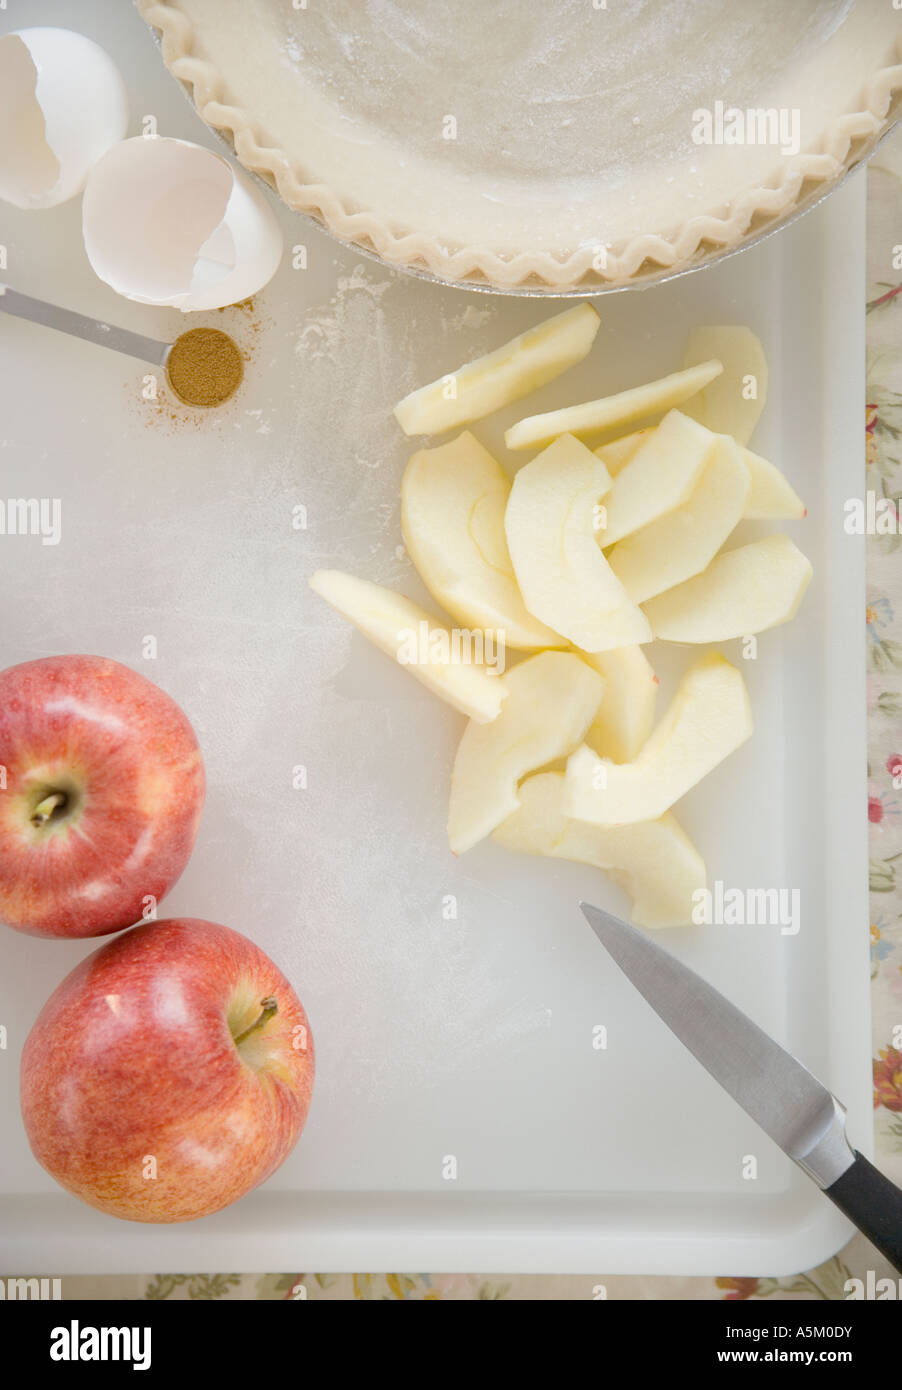 High angle view of slice apples and pie crust Stock Photo